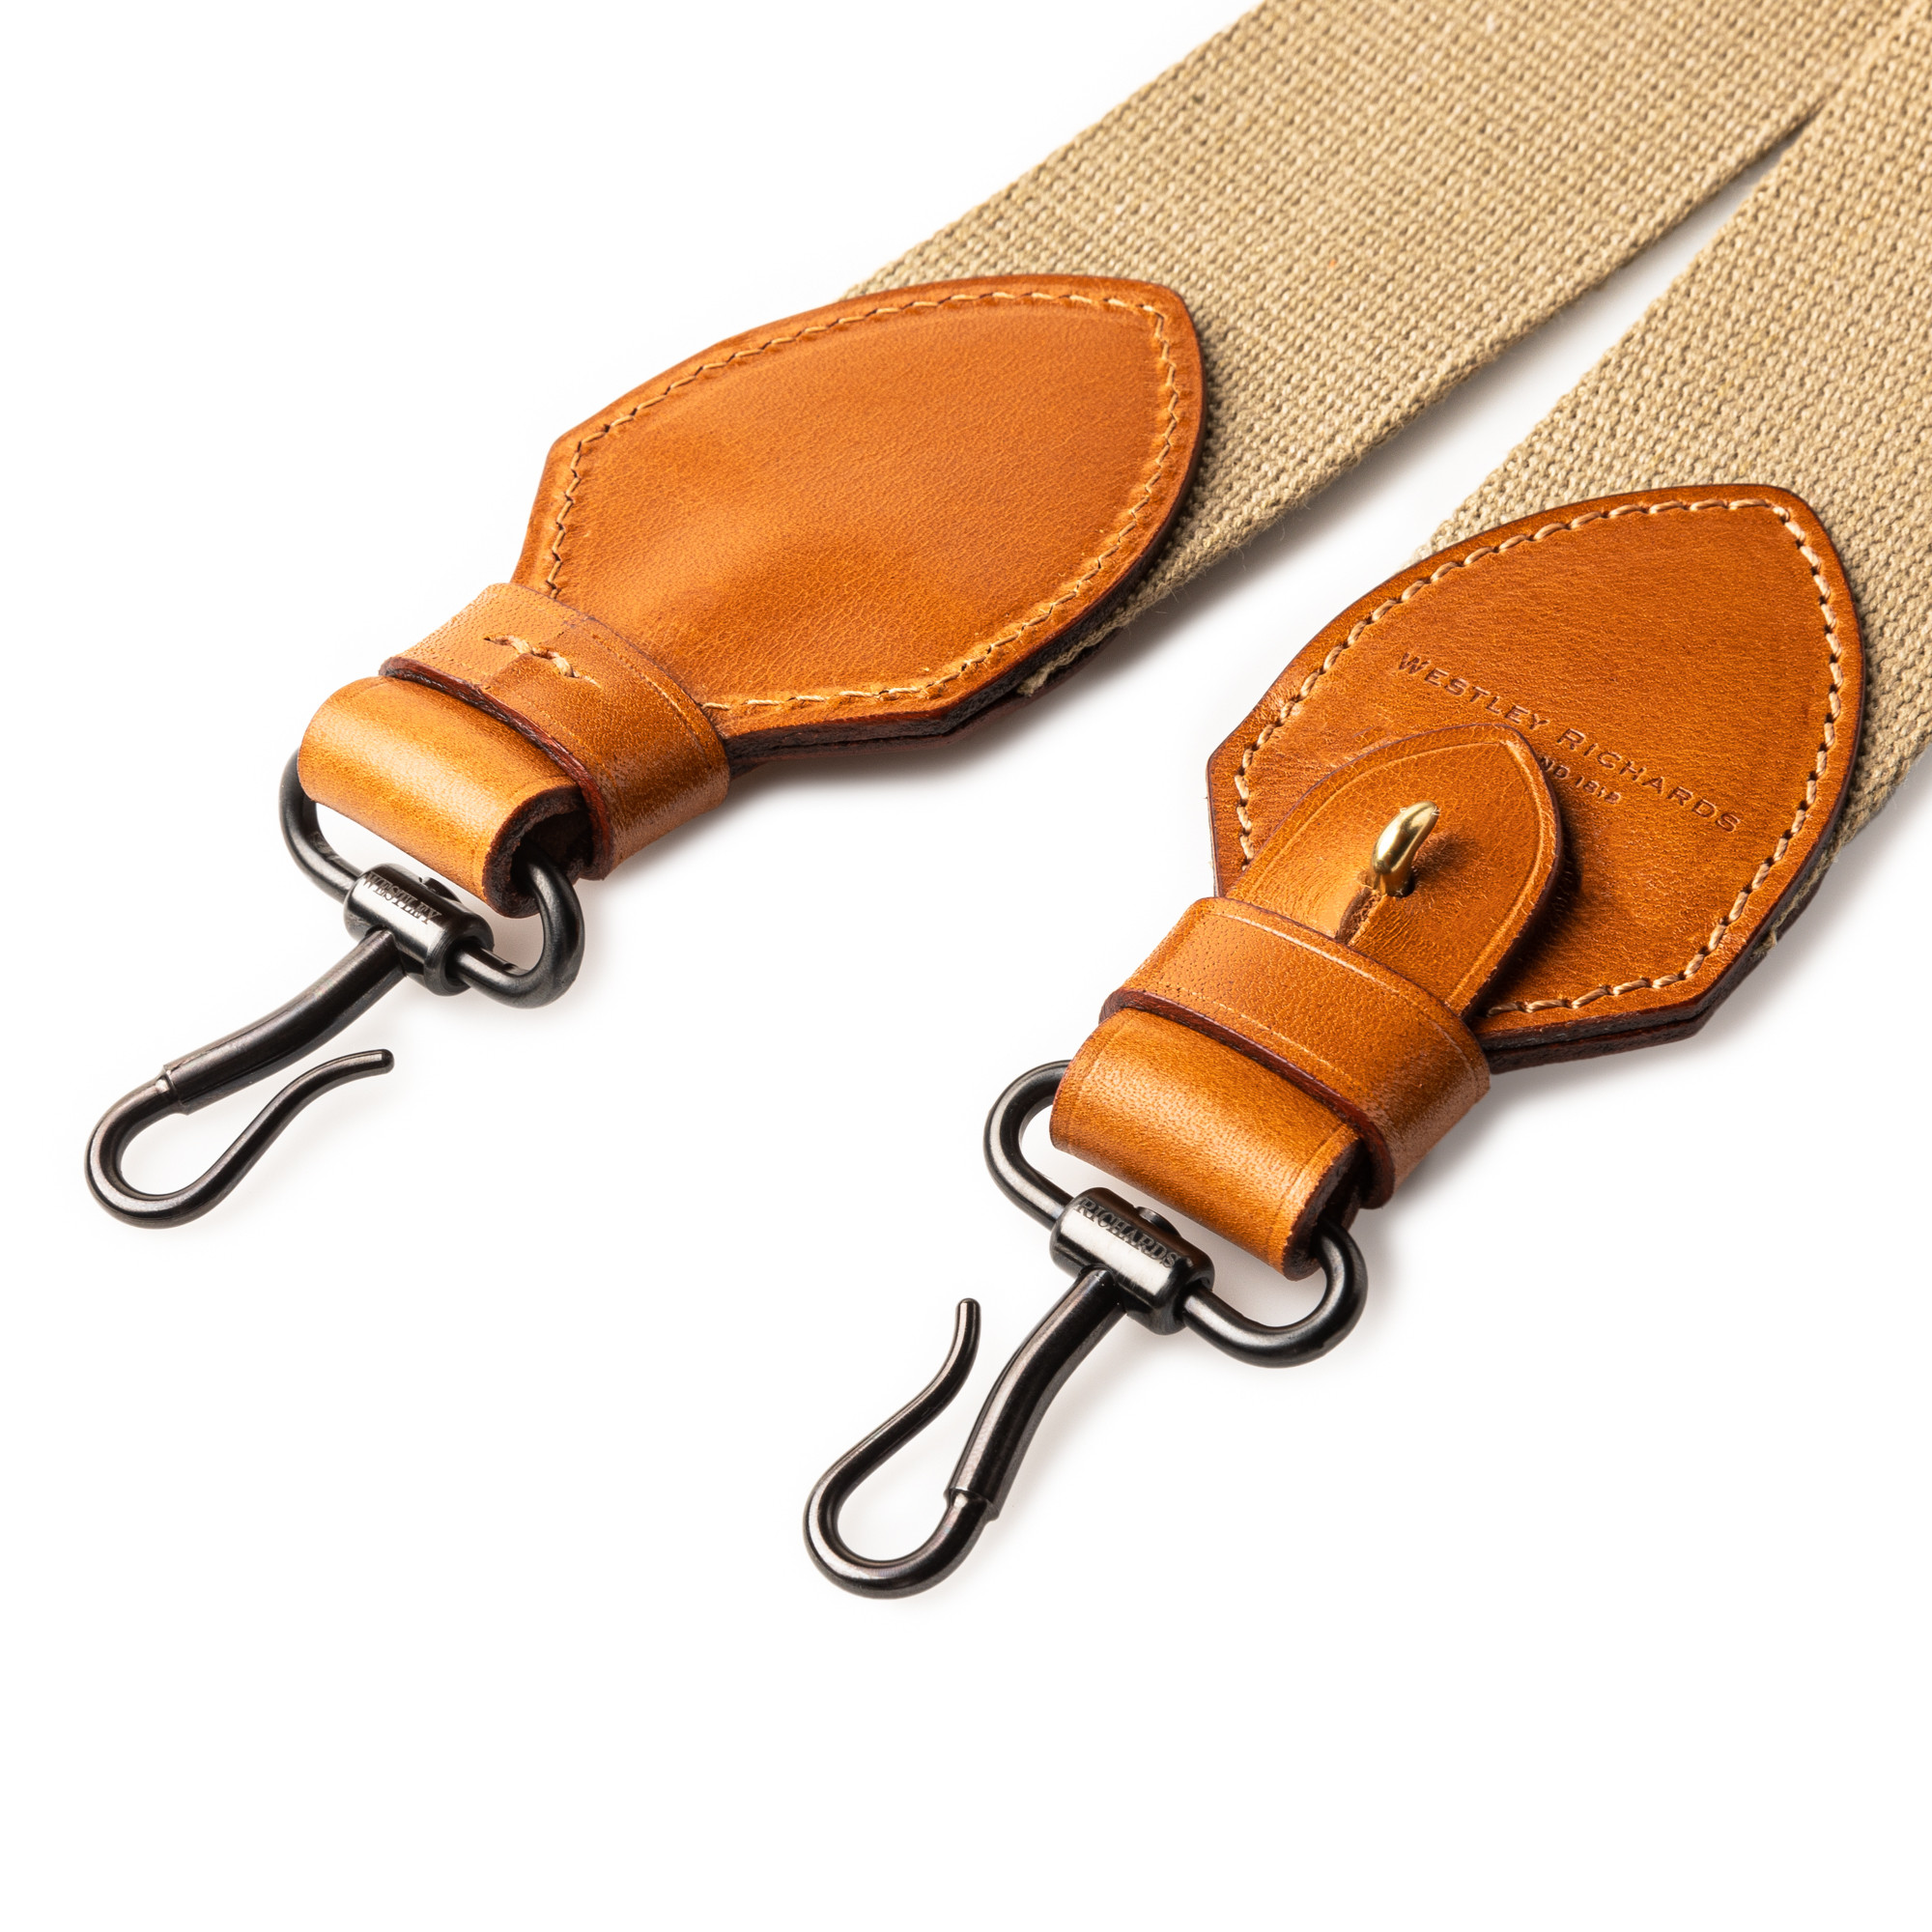 2 Canvas Rifle Sling in Sand & Mid Tan